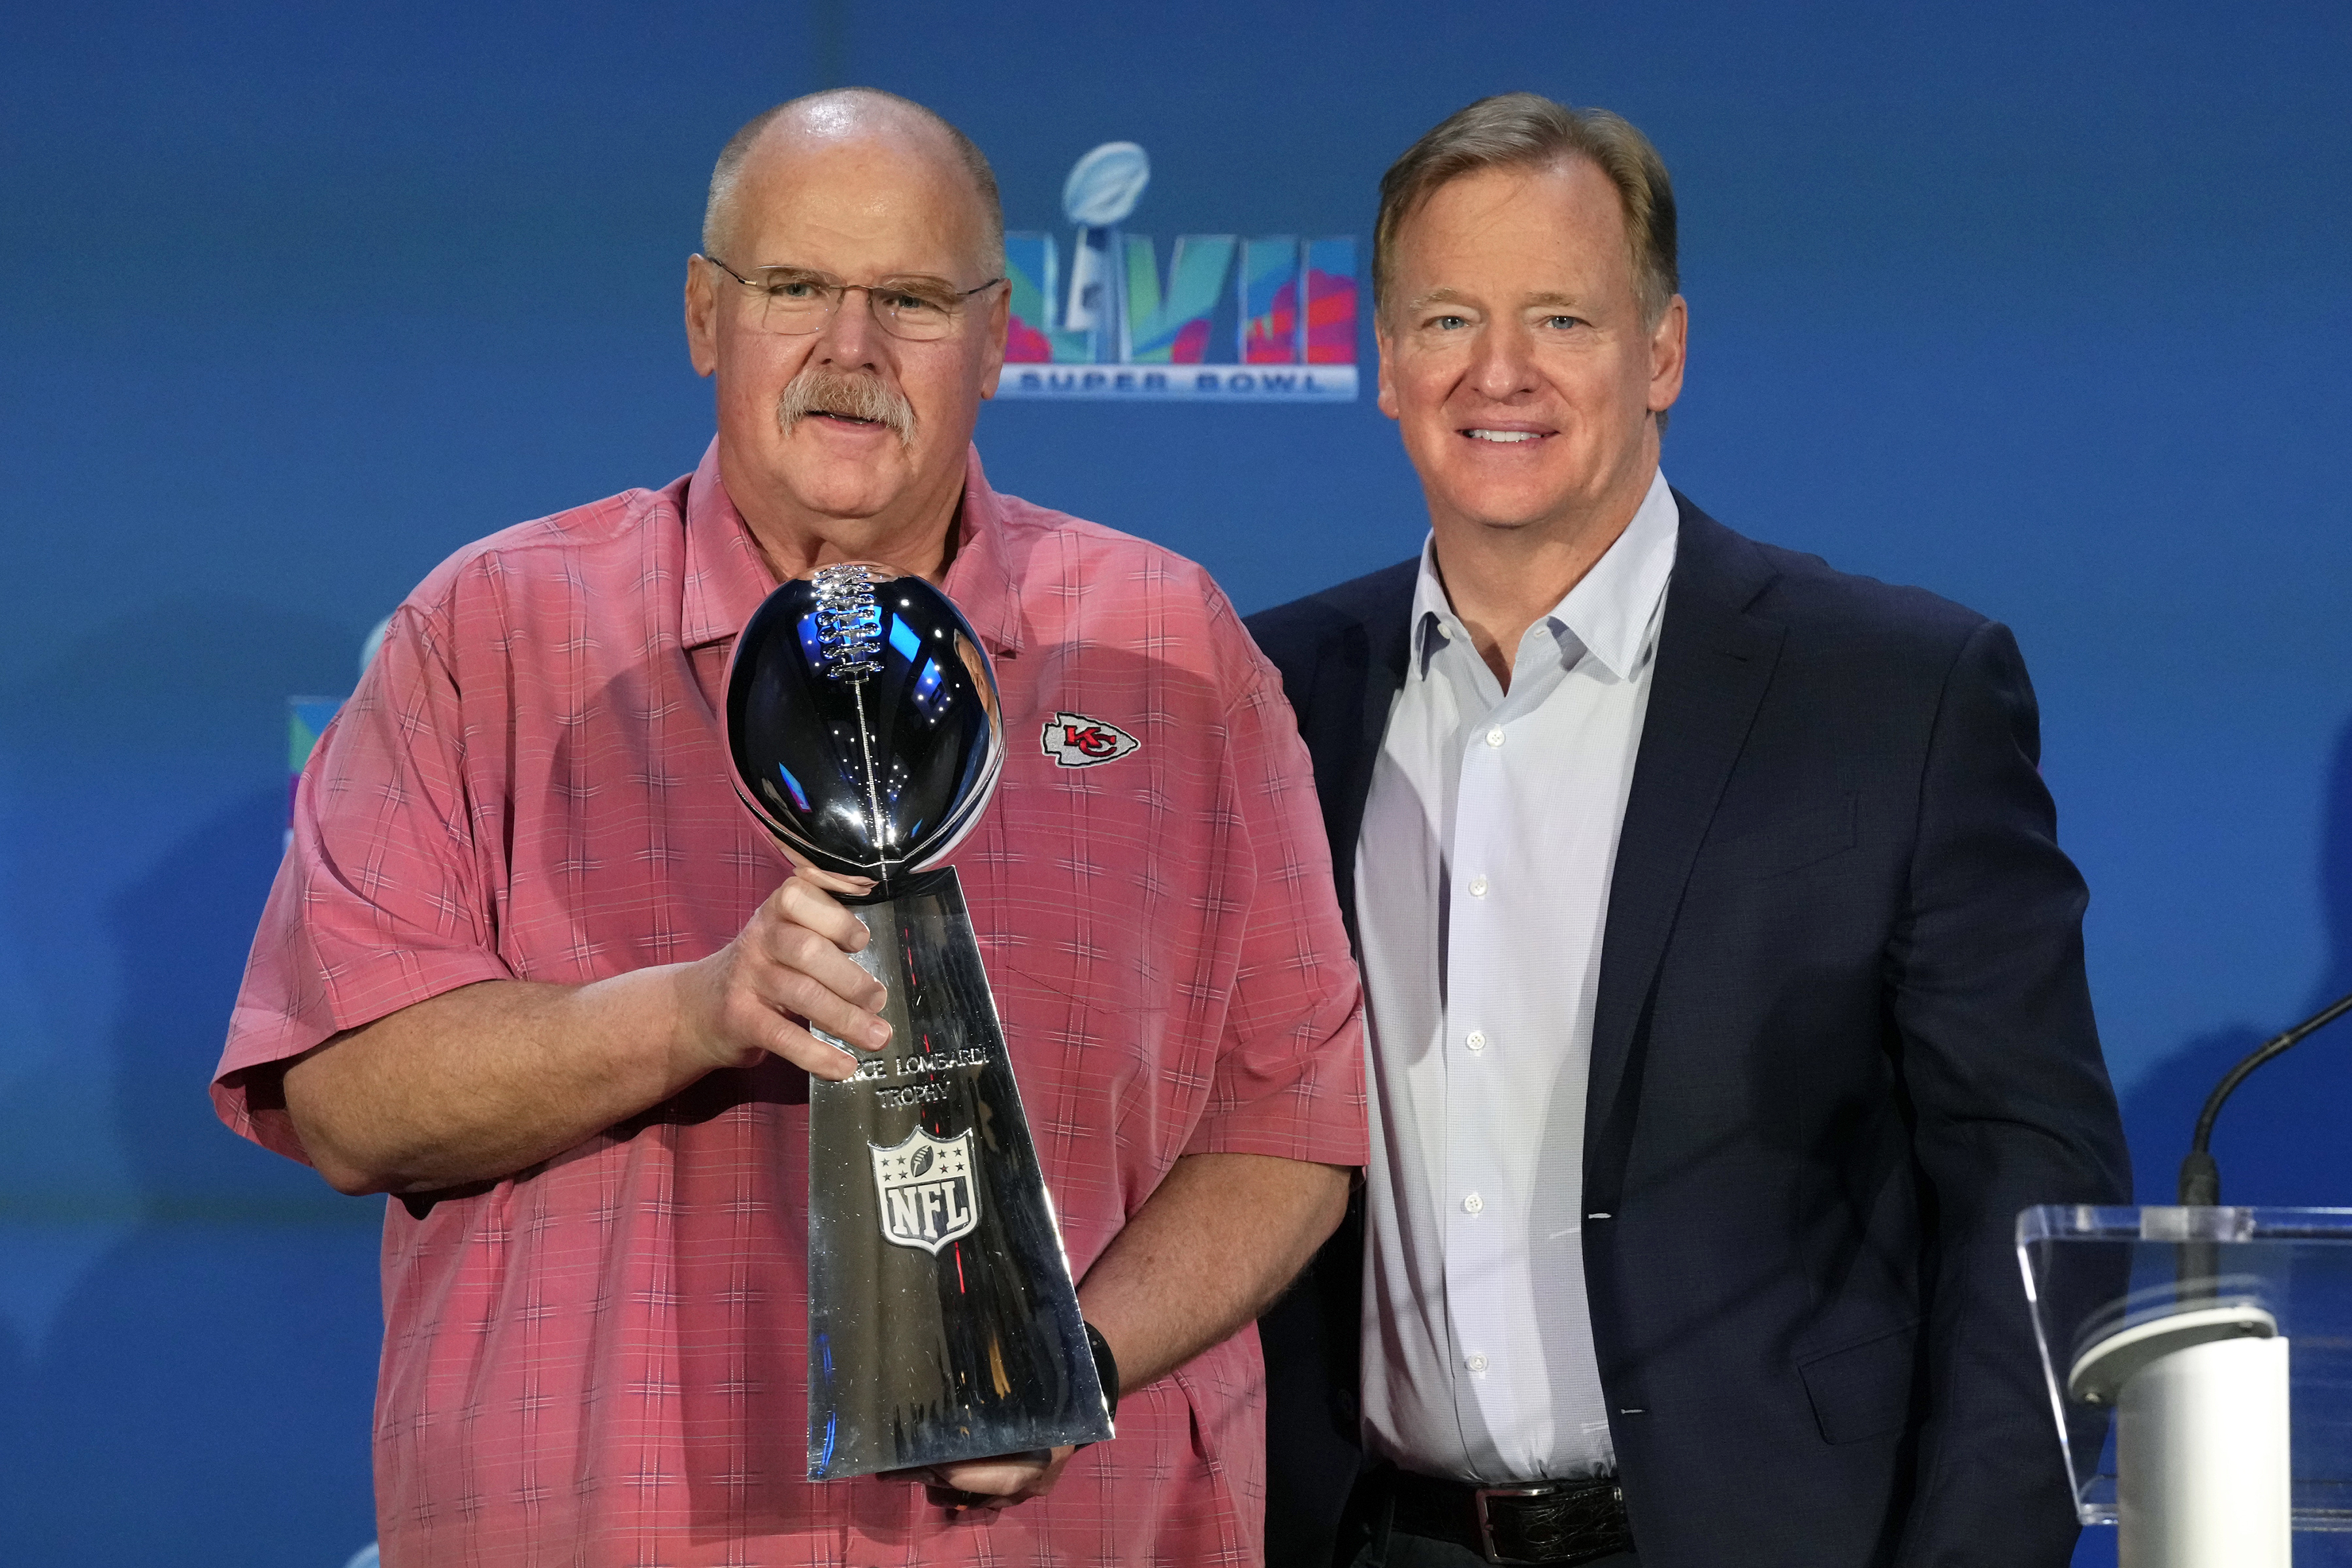 Feb 13, 2023; Phoenix, AZ, USA; Kansas City Chiefs coach Andy Reid (left) and NFL commissioner Roger Goodell pose with Vince Lombardi trophy during the Super Bowl 57 Winning Team Head Coach and MVP press conference at the Phoenix Convention Center. Mandatory Credit: Kirby Lee-USA TODAY Sports (Green Bay Packers)